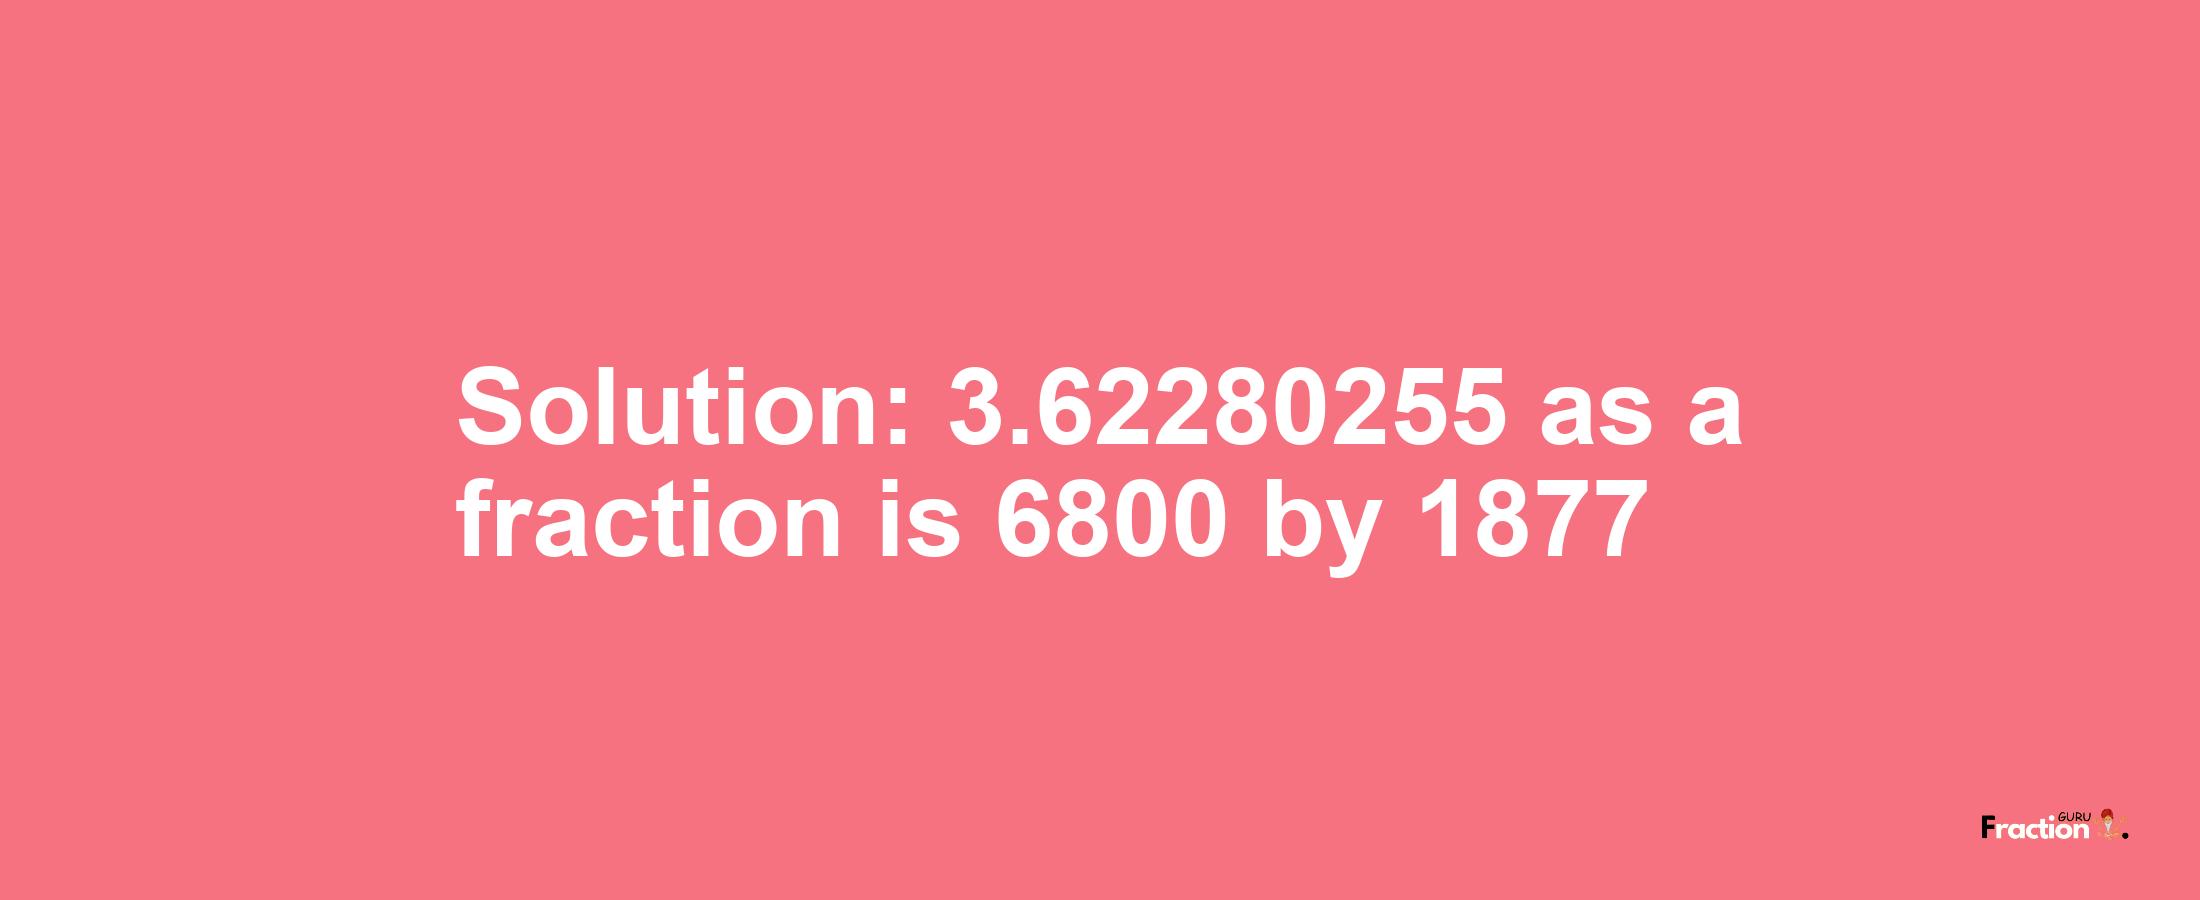 Solution:3.62280255 as a fraction is 6800/1877